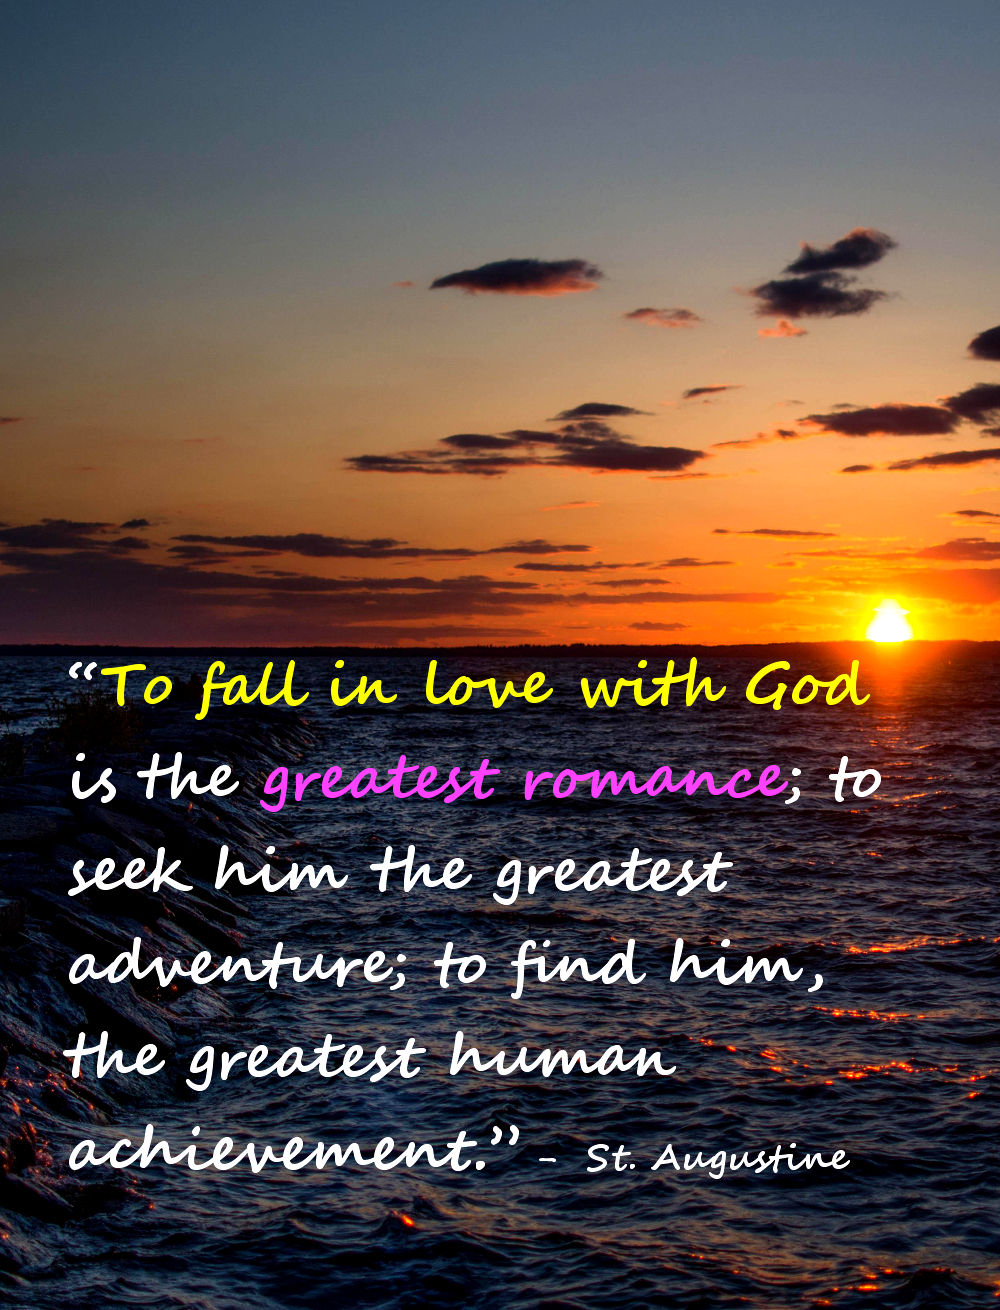 Love of God Quotes - Quotes, Poems, Prayers, Bible Verses and ...